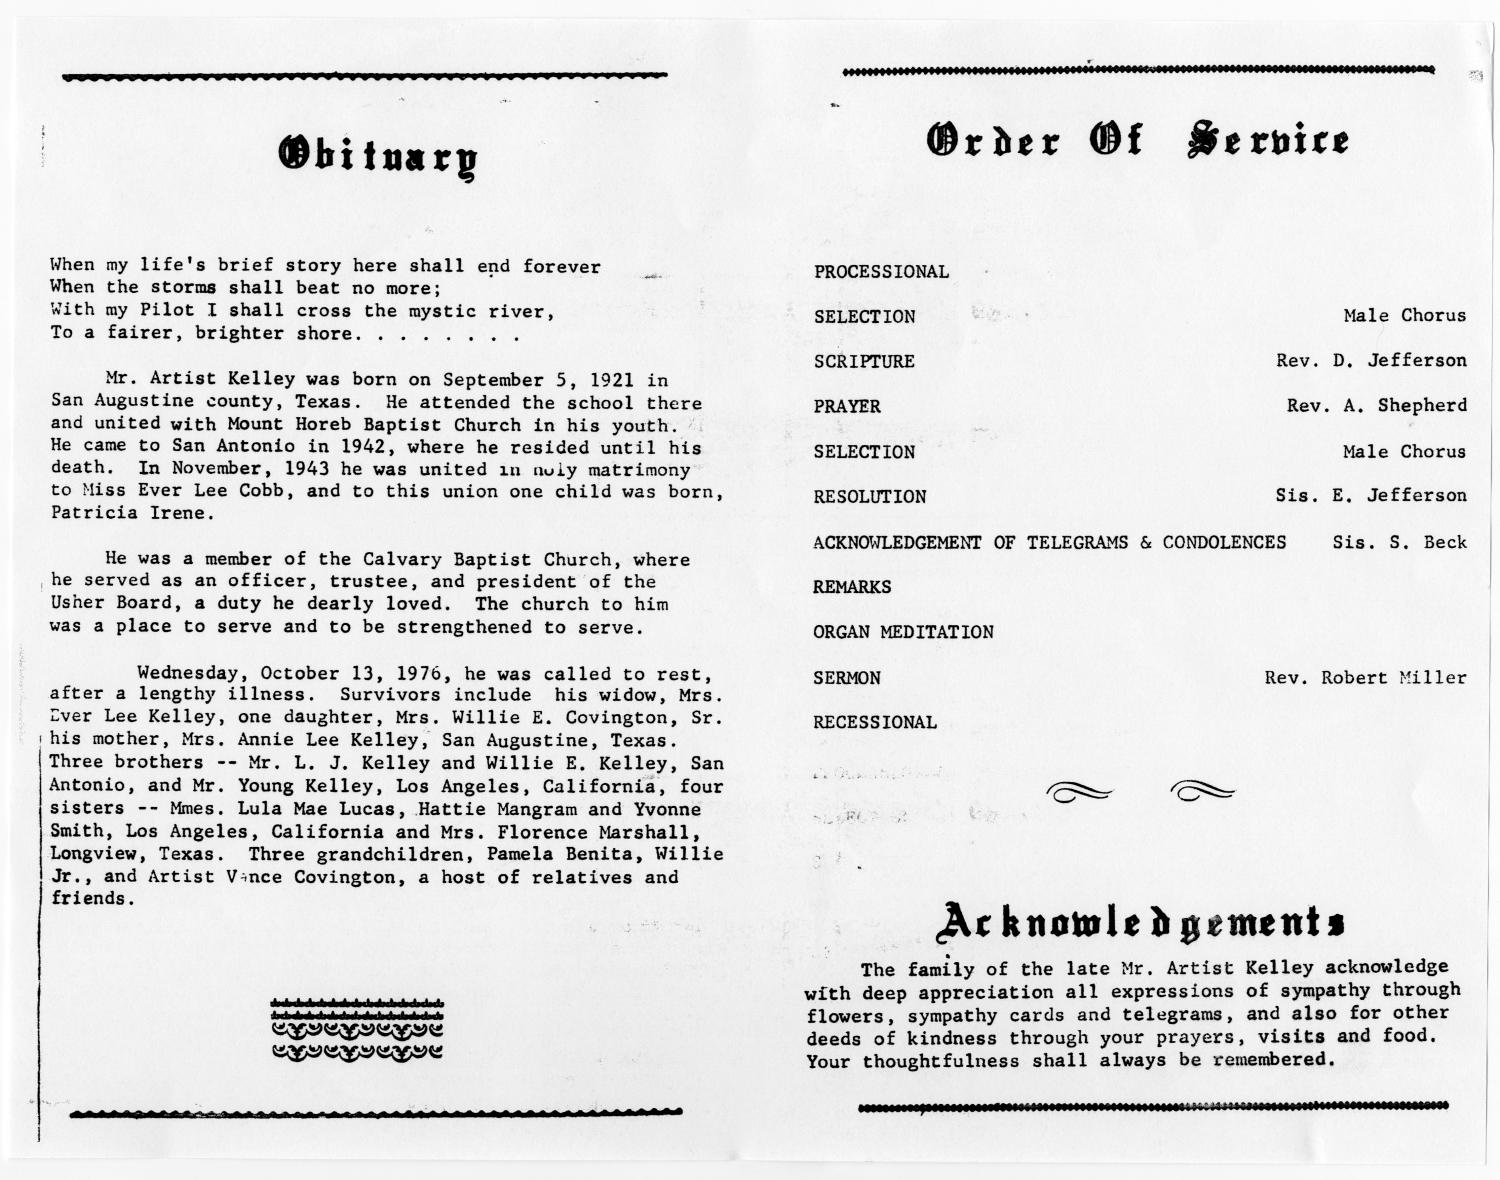 [Funeral Program for Artist Kelley, October 18, 1976]
                                                
                                                    [Sequence #]: 2 of 3
                                                